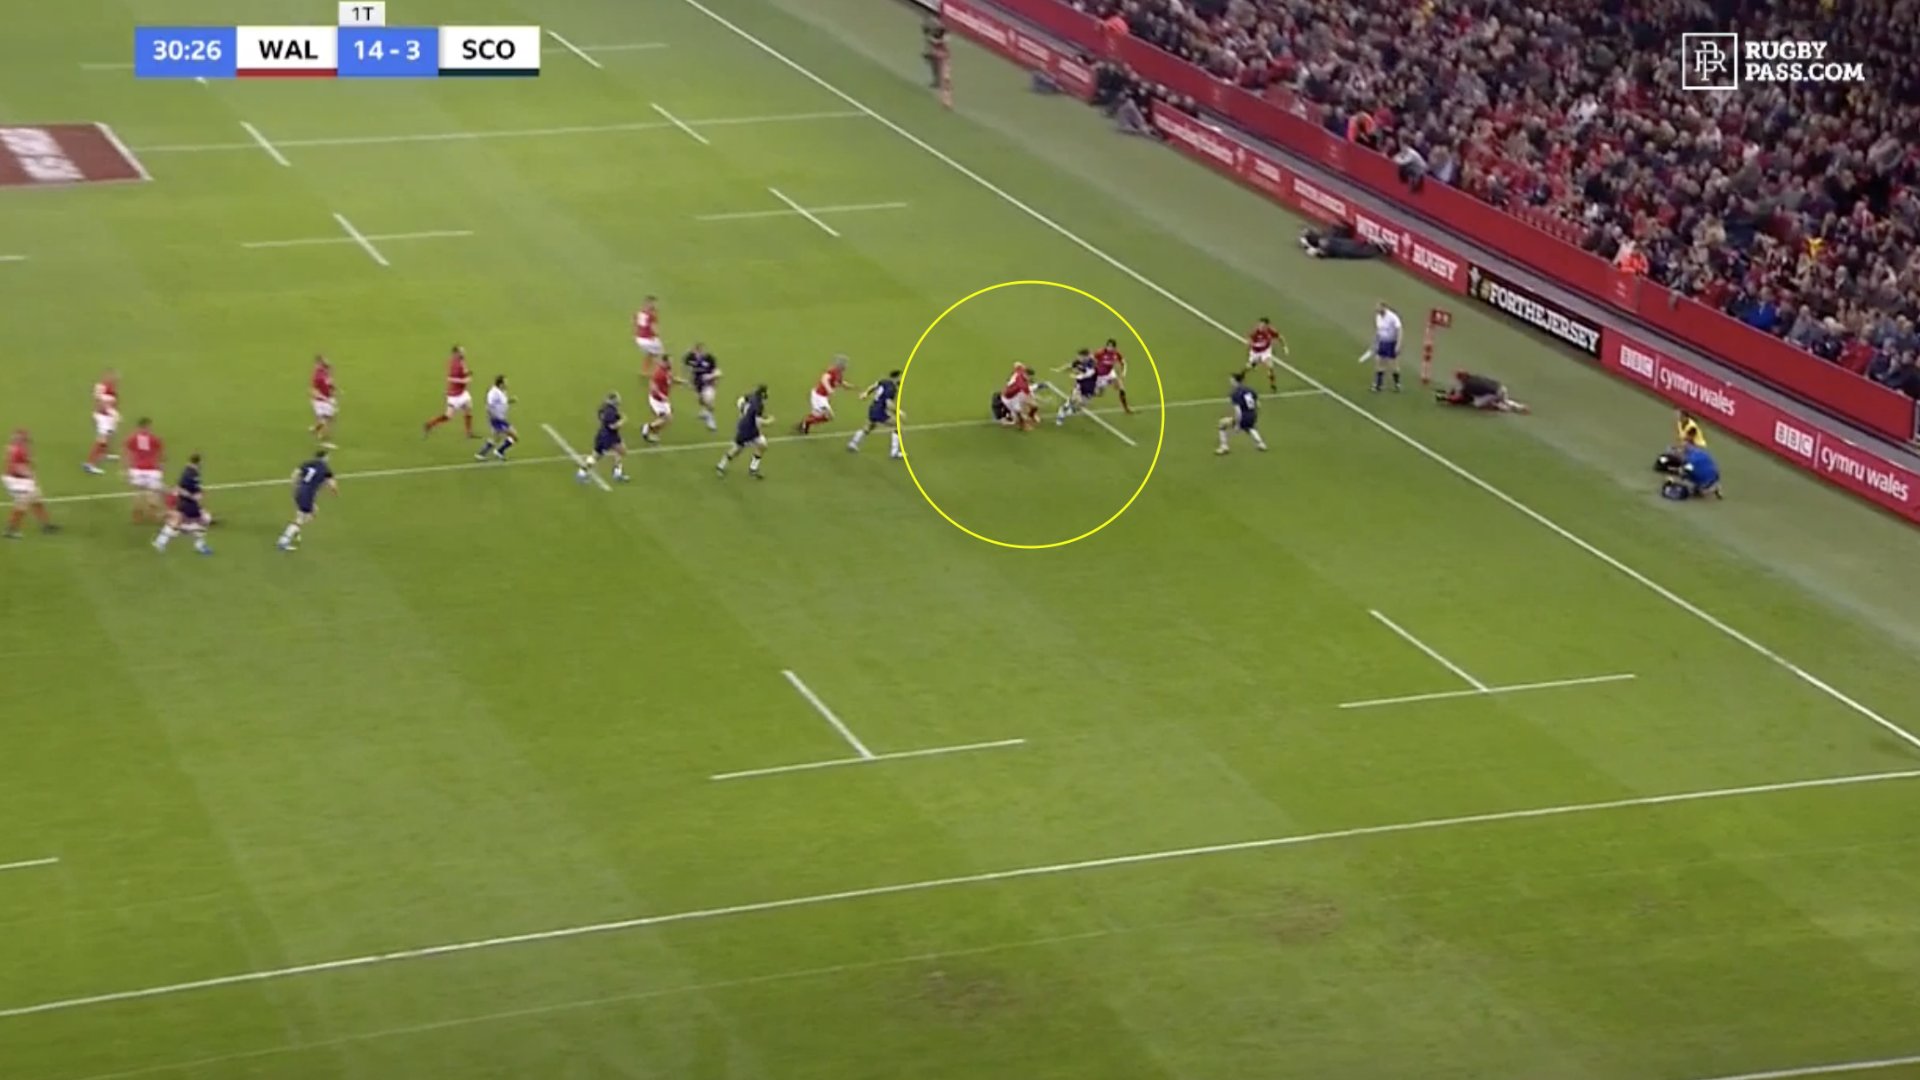 WATCH: 4 men can't take George North down in barnstorming try